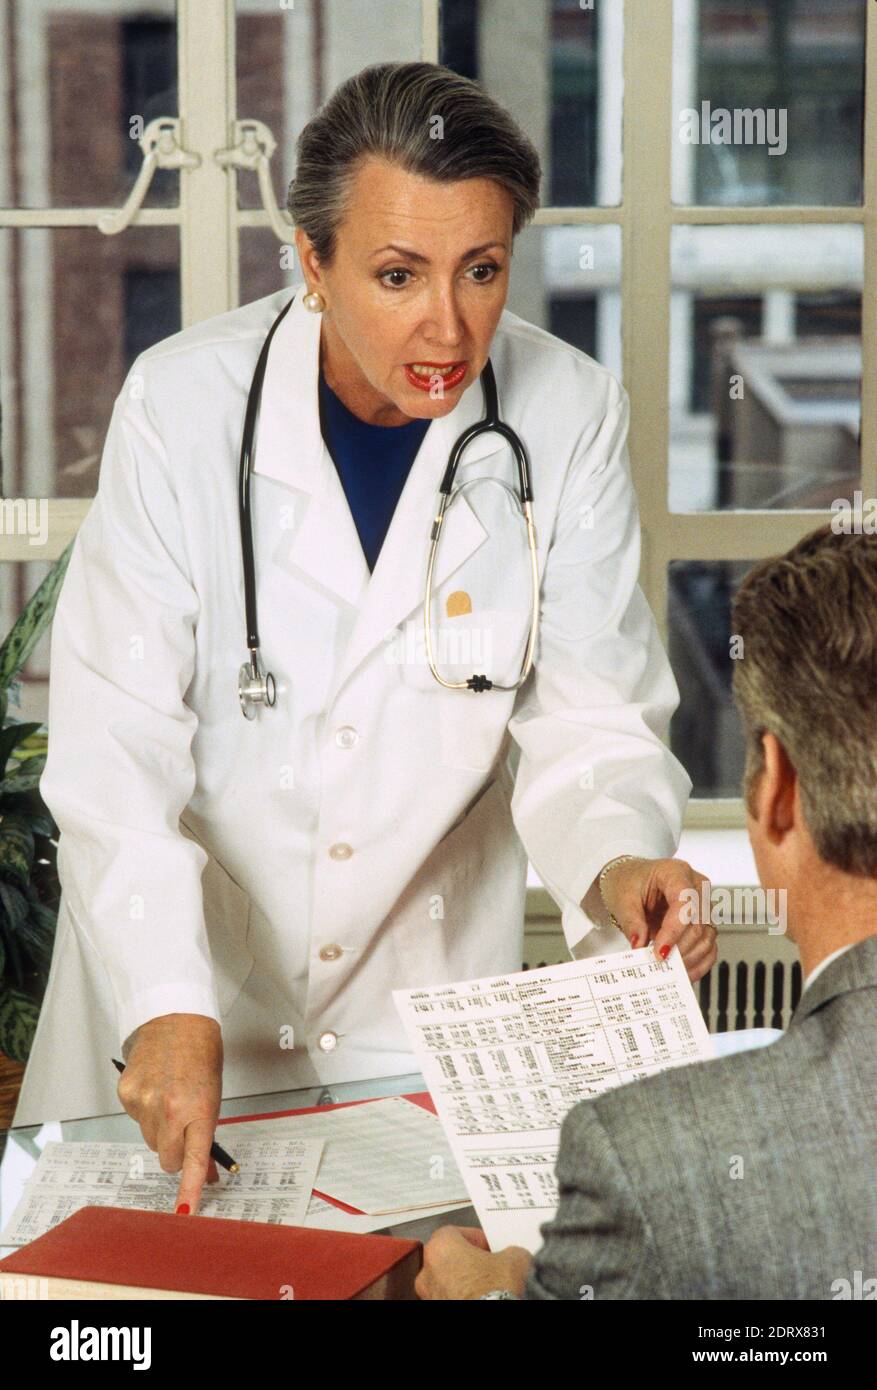 1994, Female Doctor Reviews Lab Results with a Male Patient., USA Stock Photo